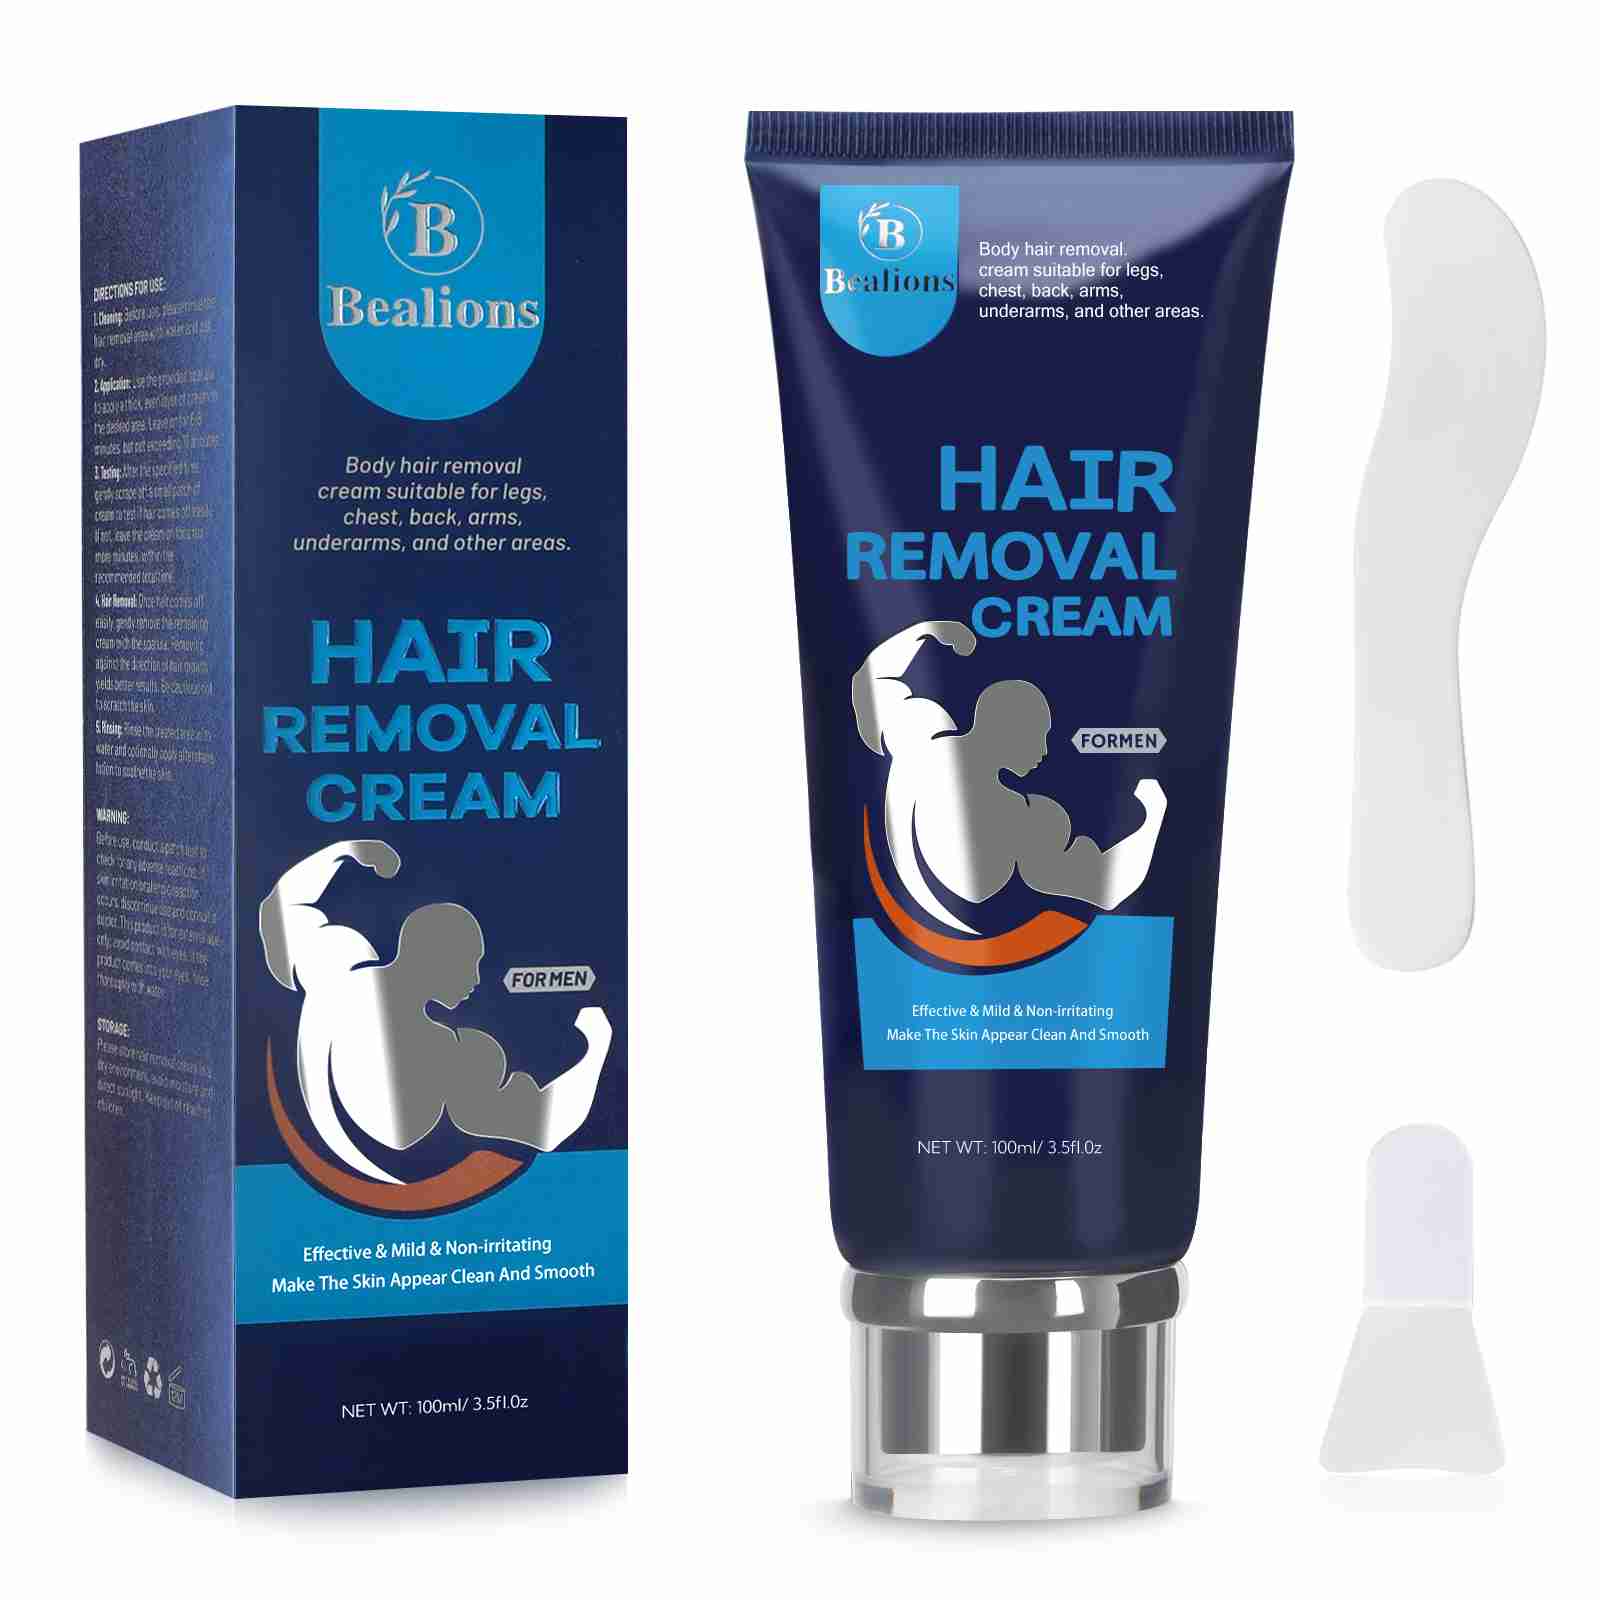 gentle-hair-removal-cream-for-men with cash back rebate